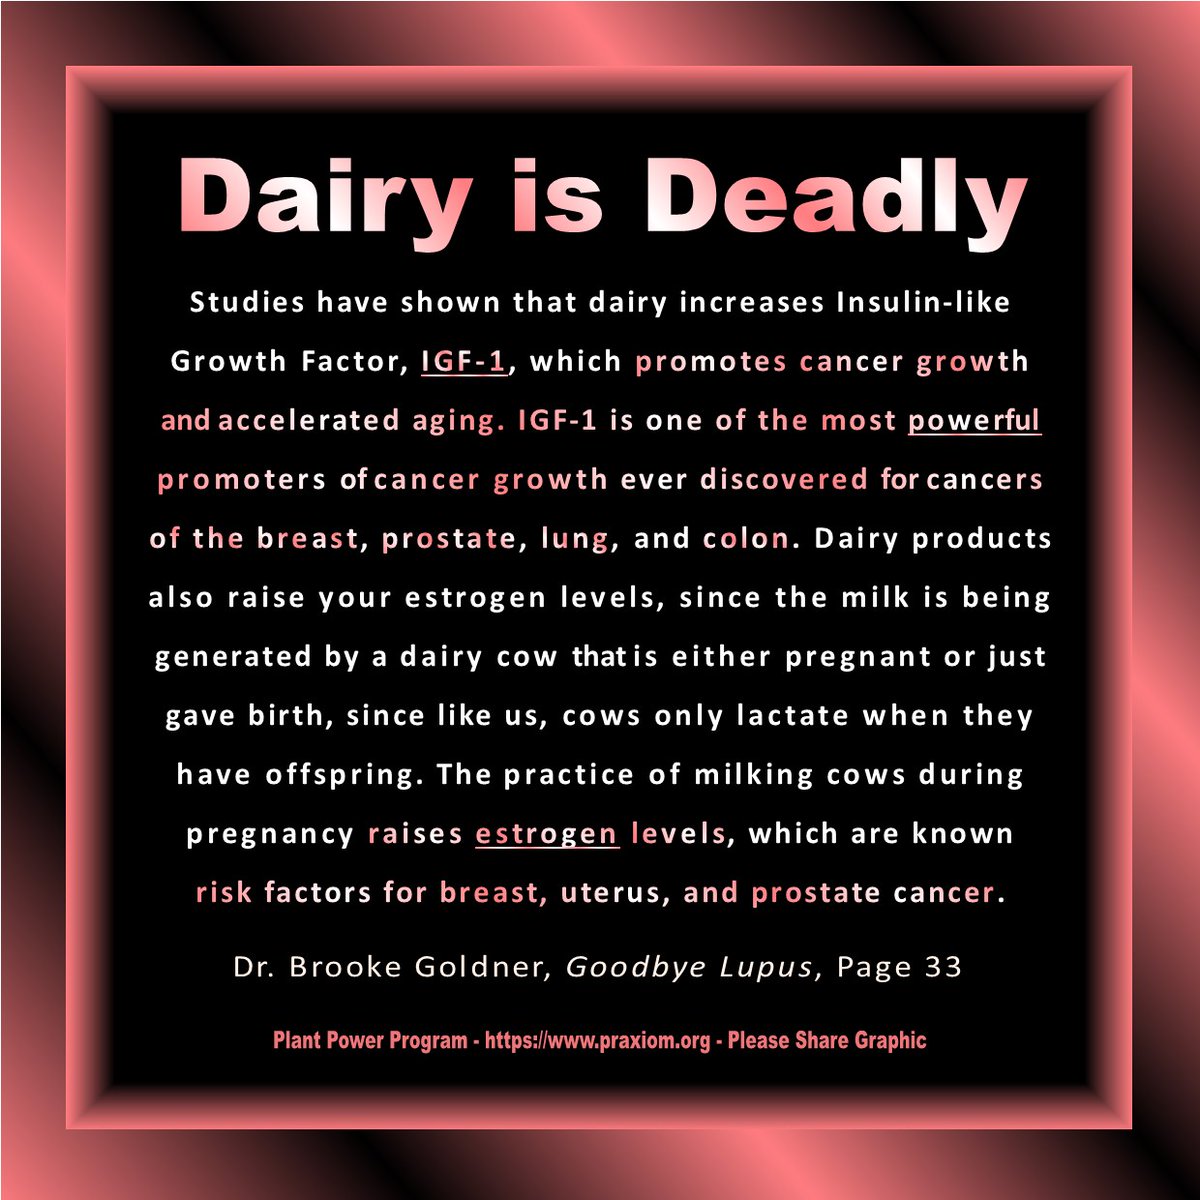 All my Plant Power Infographics are free, shareable, and based on the best available scientific evidence. To order your free resource materials, please go to praxiom.org/free.htm #dairy #dairyfarm #cancer #milk #cheese #aging #plantbased #plantpower